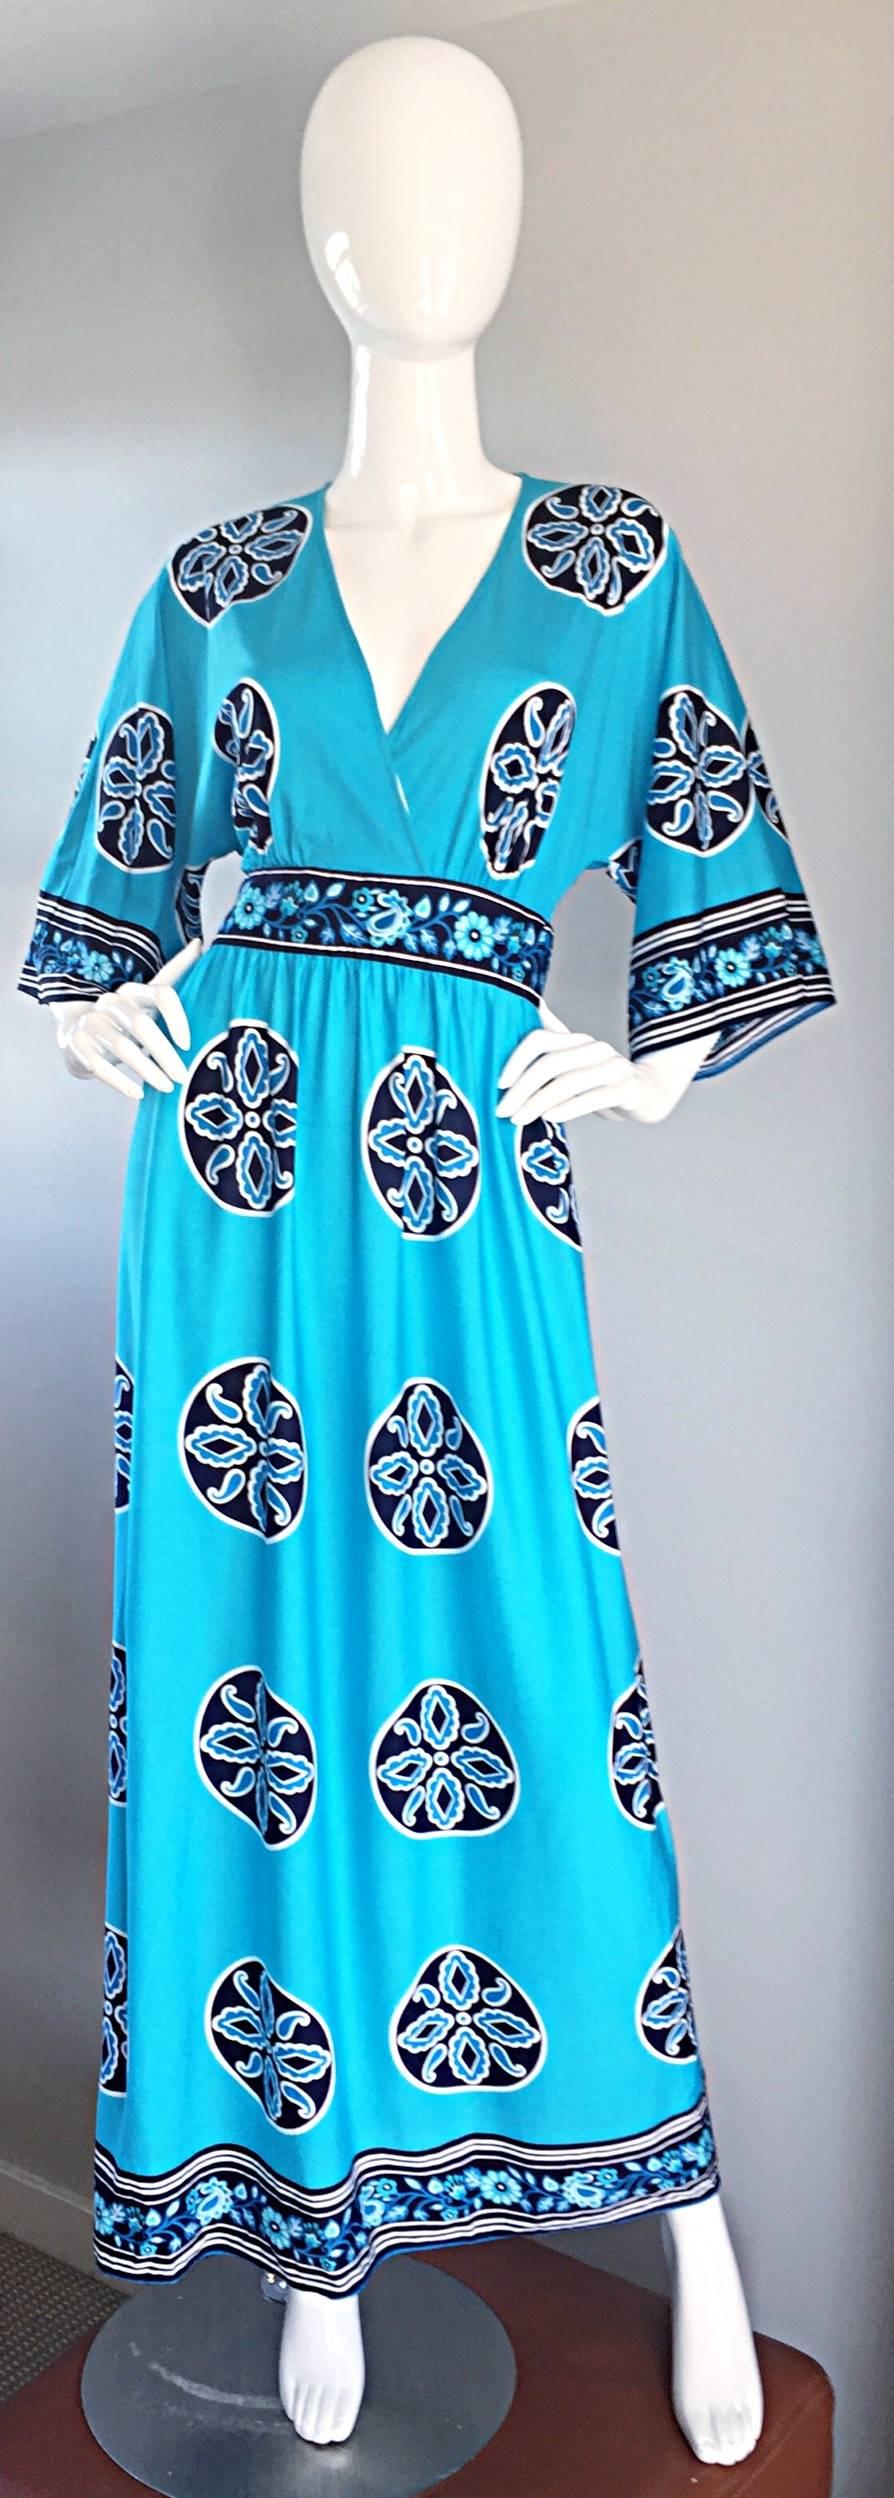 Incredible vintage 1970s jersey maxi dress! Vibrant aqua blue color, with mosaic print throughout, and flower trim at waist, sleeve cuffs, and hem. Perfect bell-shaped sleeves. Looks amazing on, and can easily transition from day to night. Great